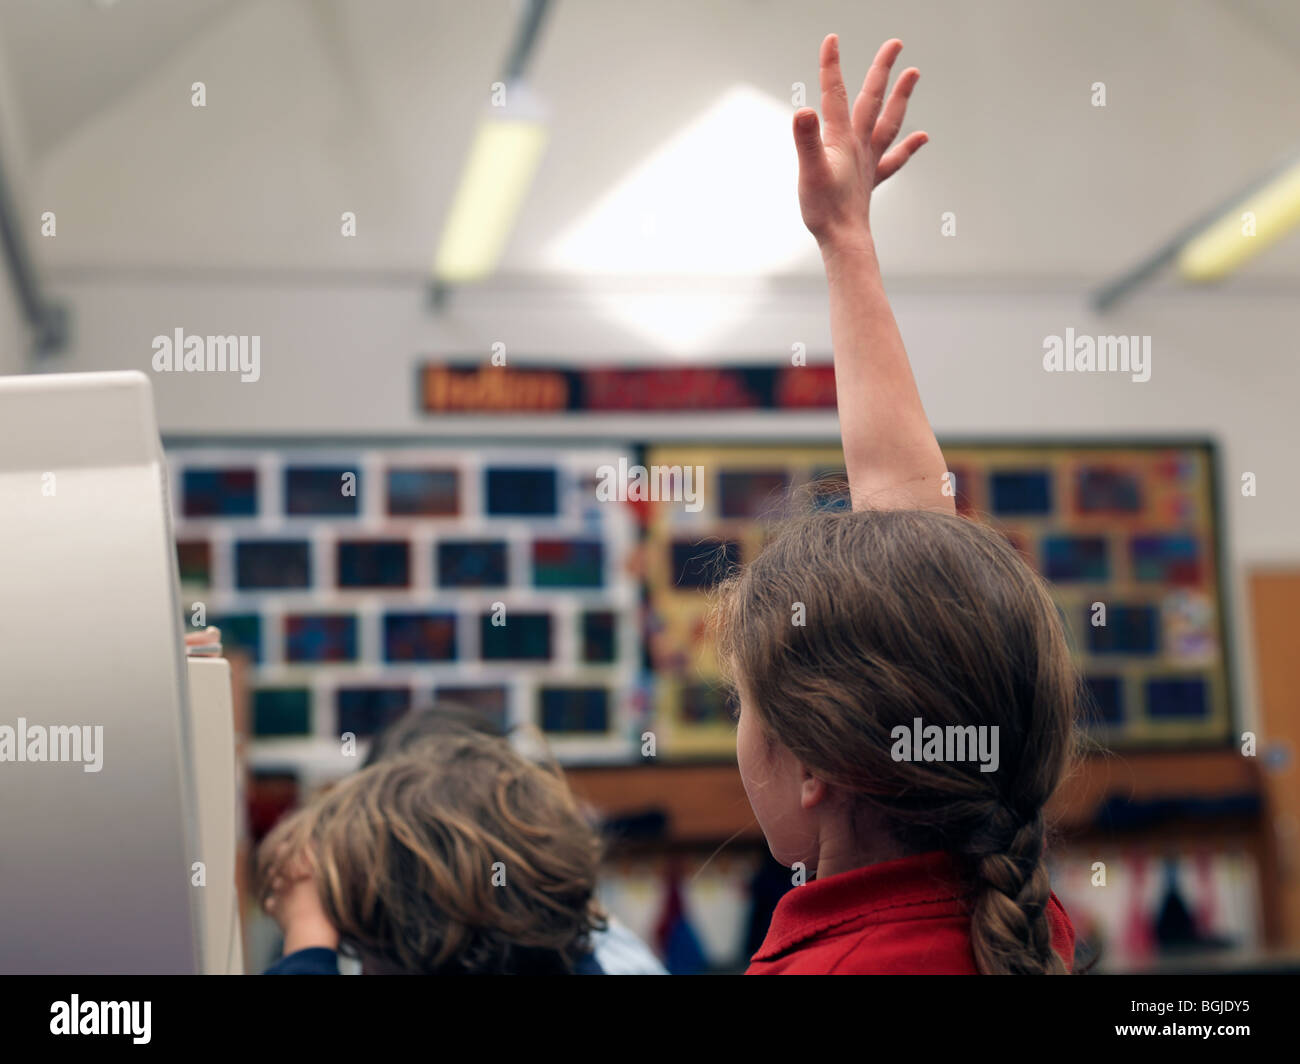 child raising hand in classroom to answer question Stock Photo